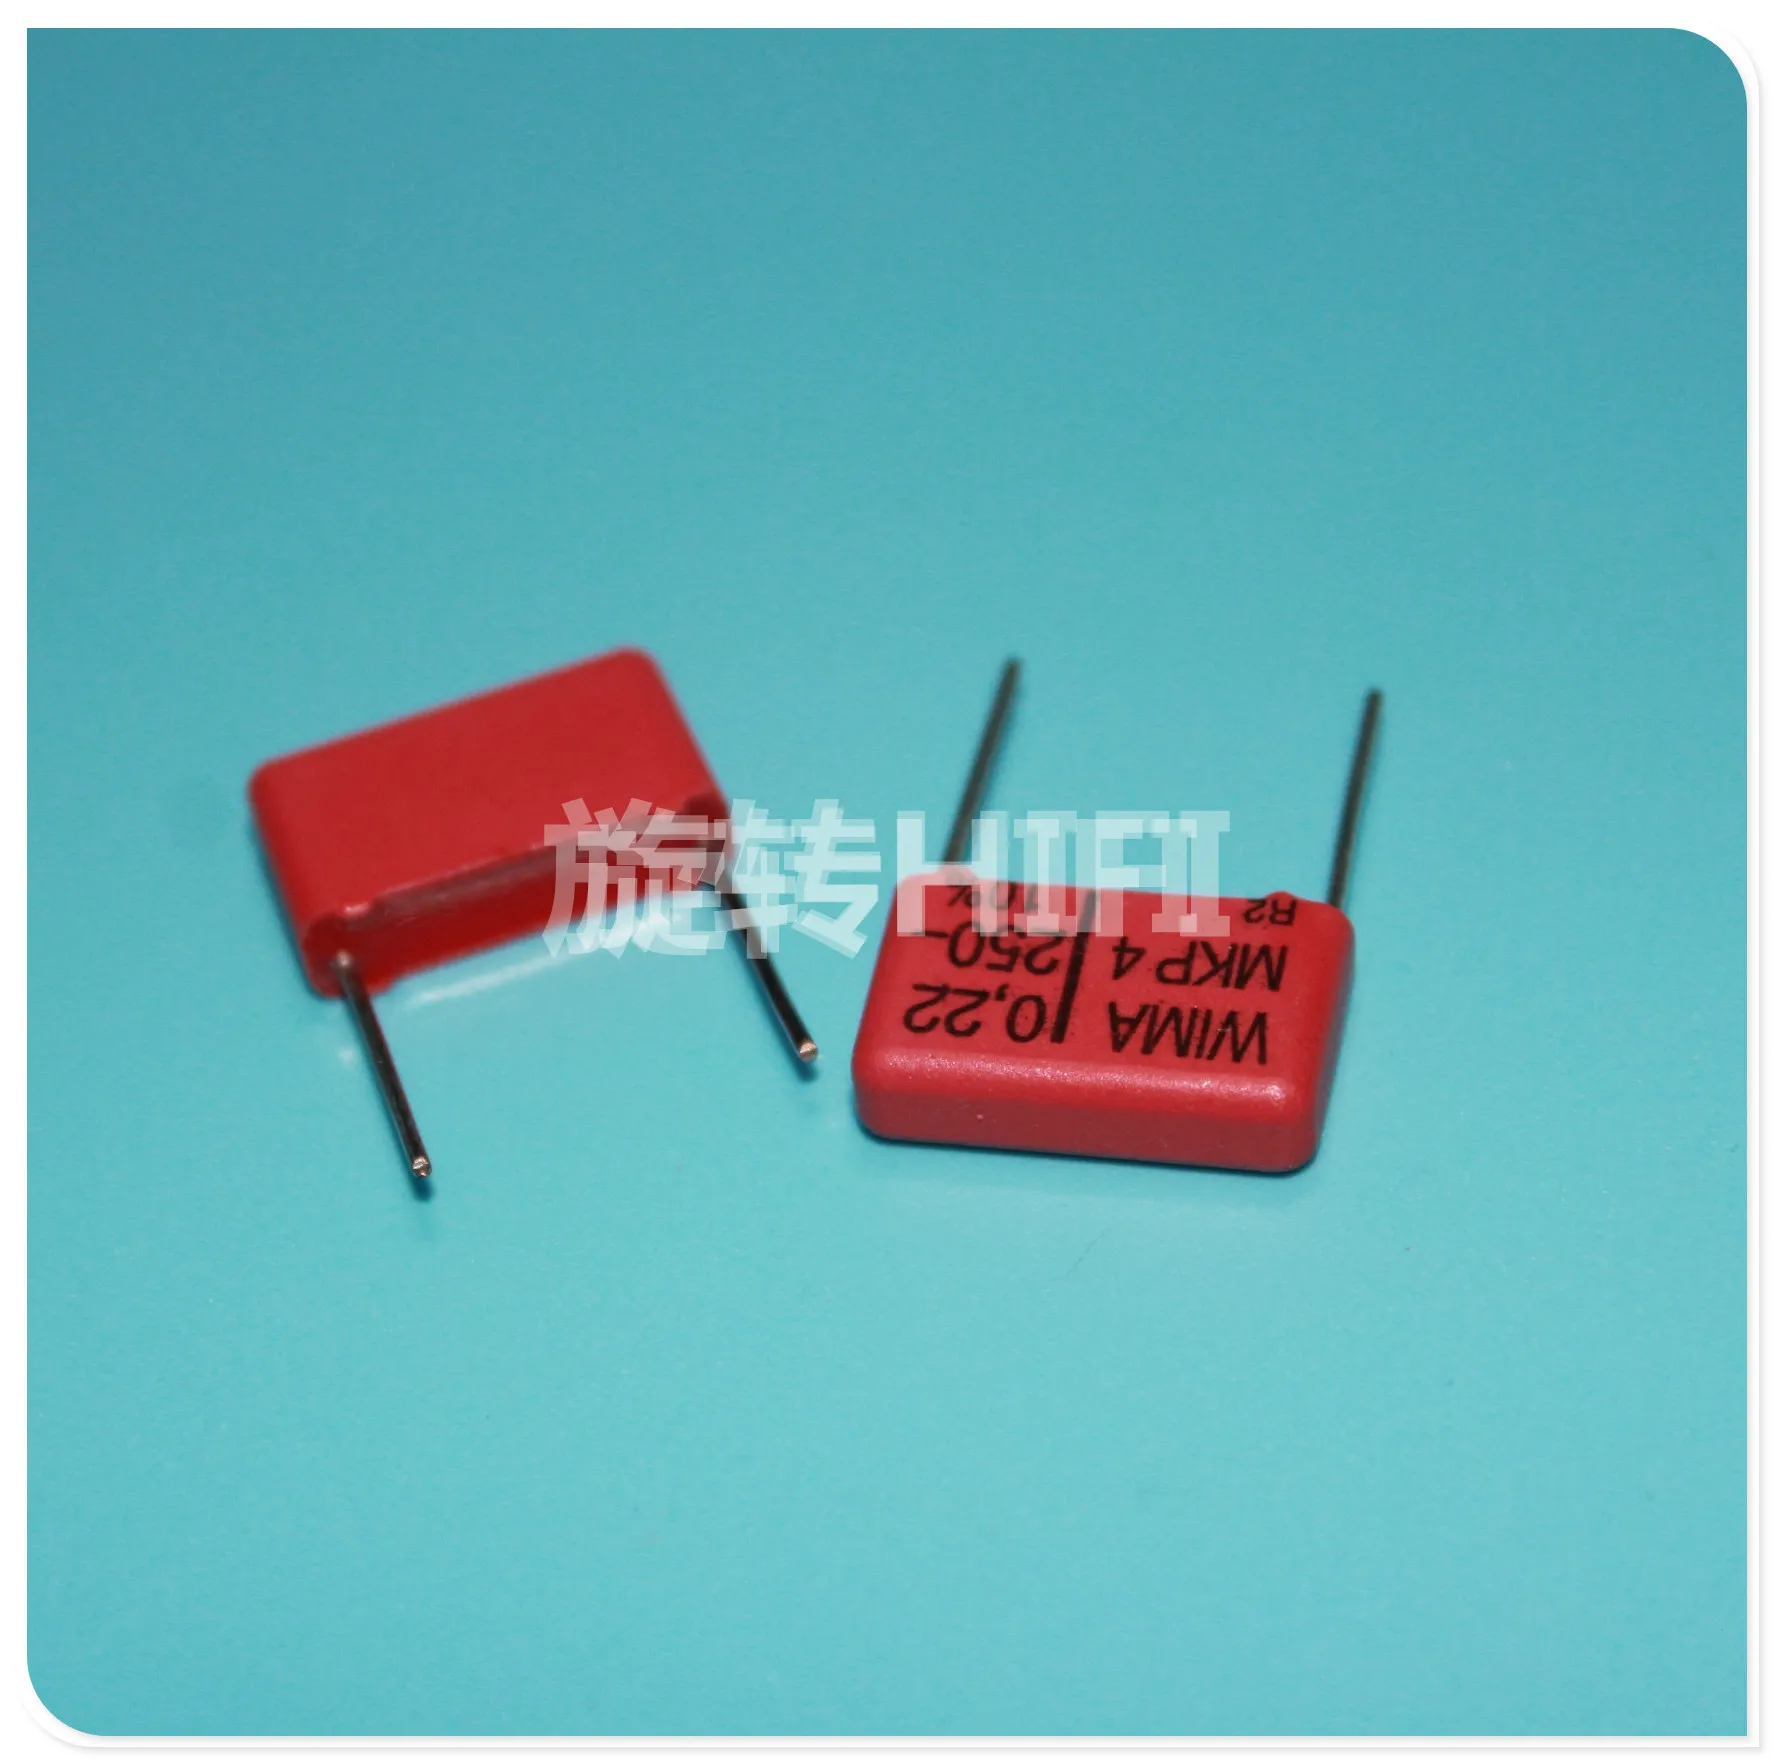 20PCS WIMA MKP4 0.22uf 220nf 224/250v new audio coupling capacitor p15 free shipping | Электронные компоненты и